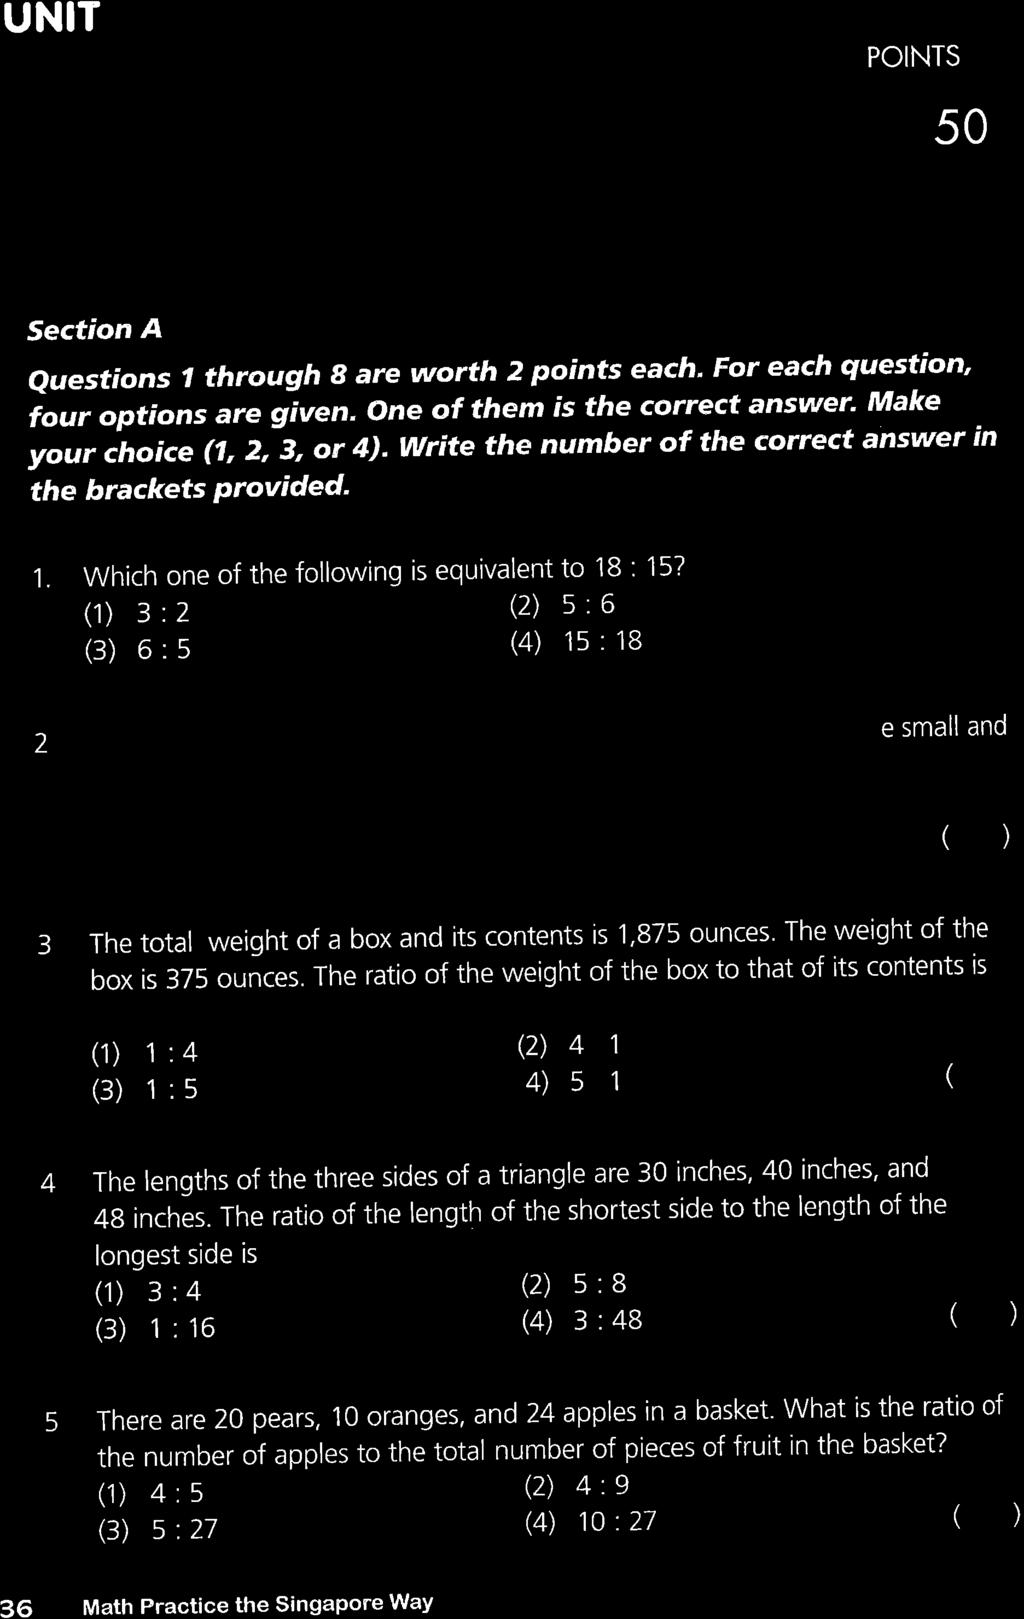 UNIT Rotio POINTS 50 Section A Qr estron s 7 through 8 are worth 2 points each. For each question' four options "r" gir.r, one of them is the correct answer' Make your ino r. (1, 2, 3, or 4).